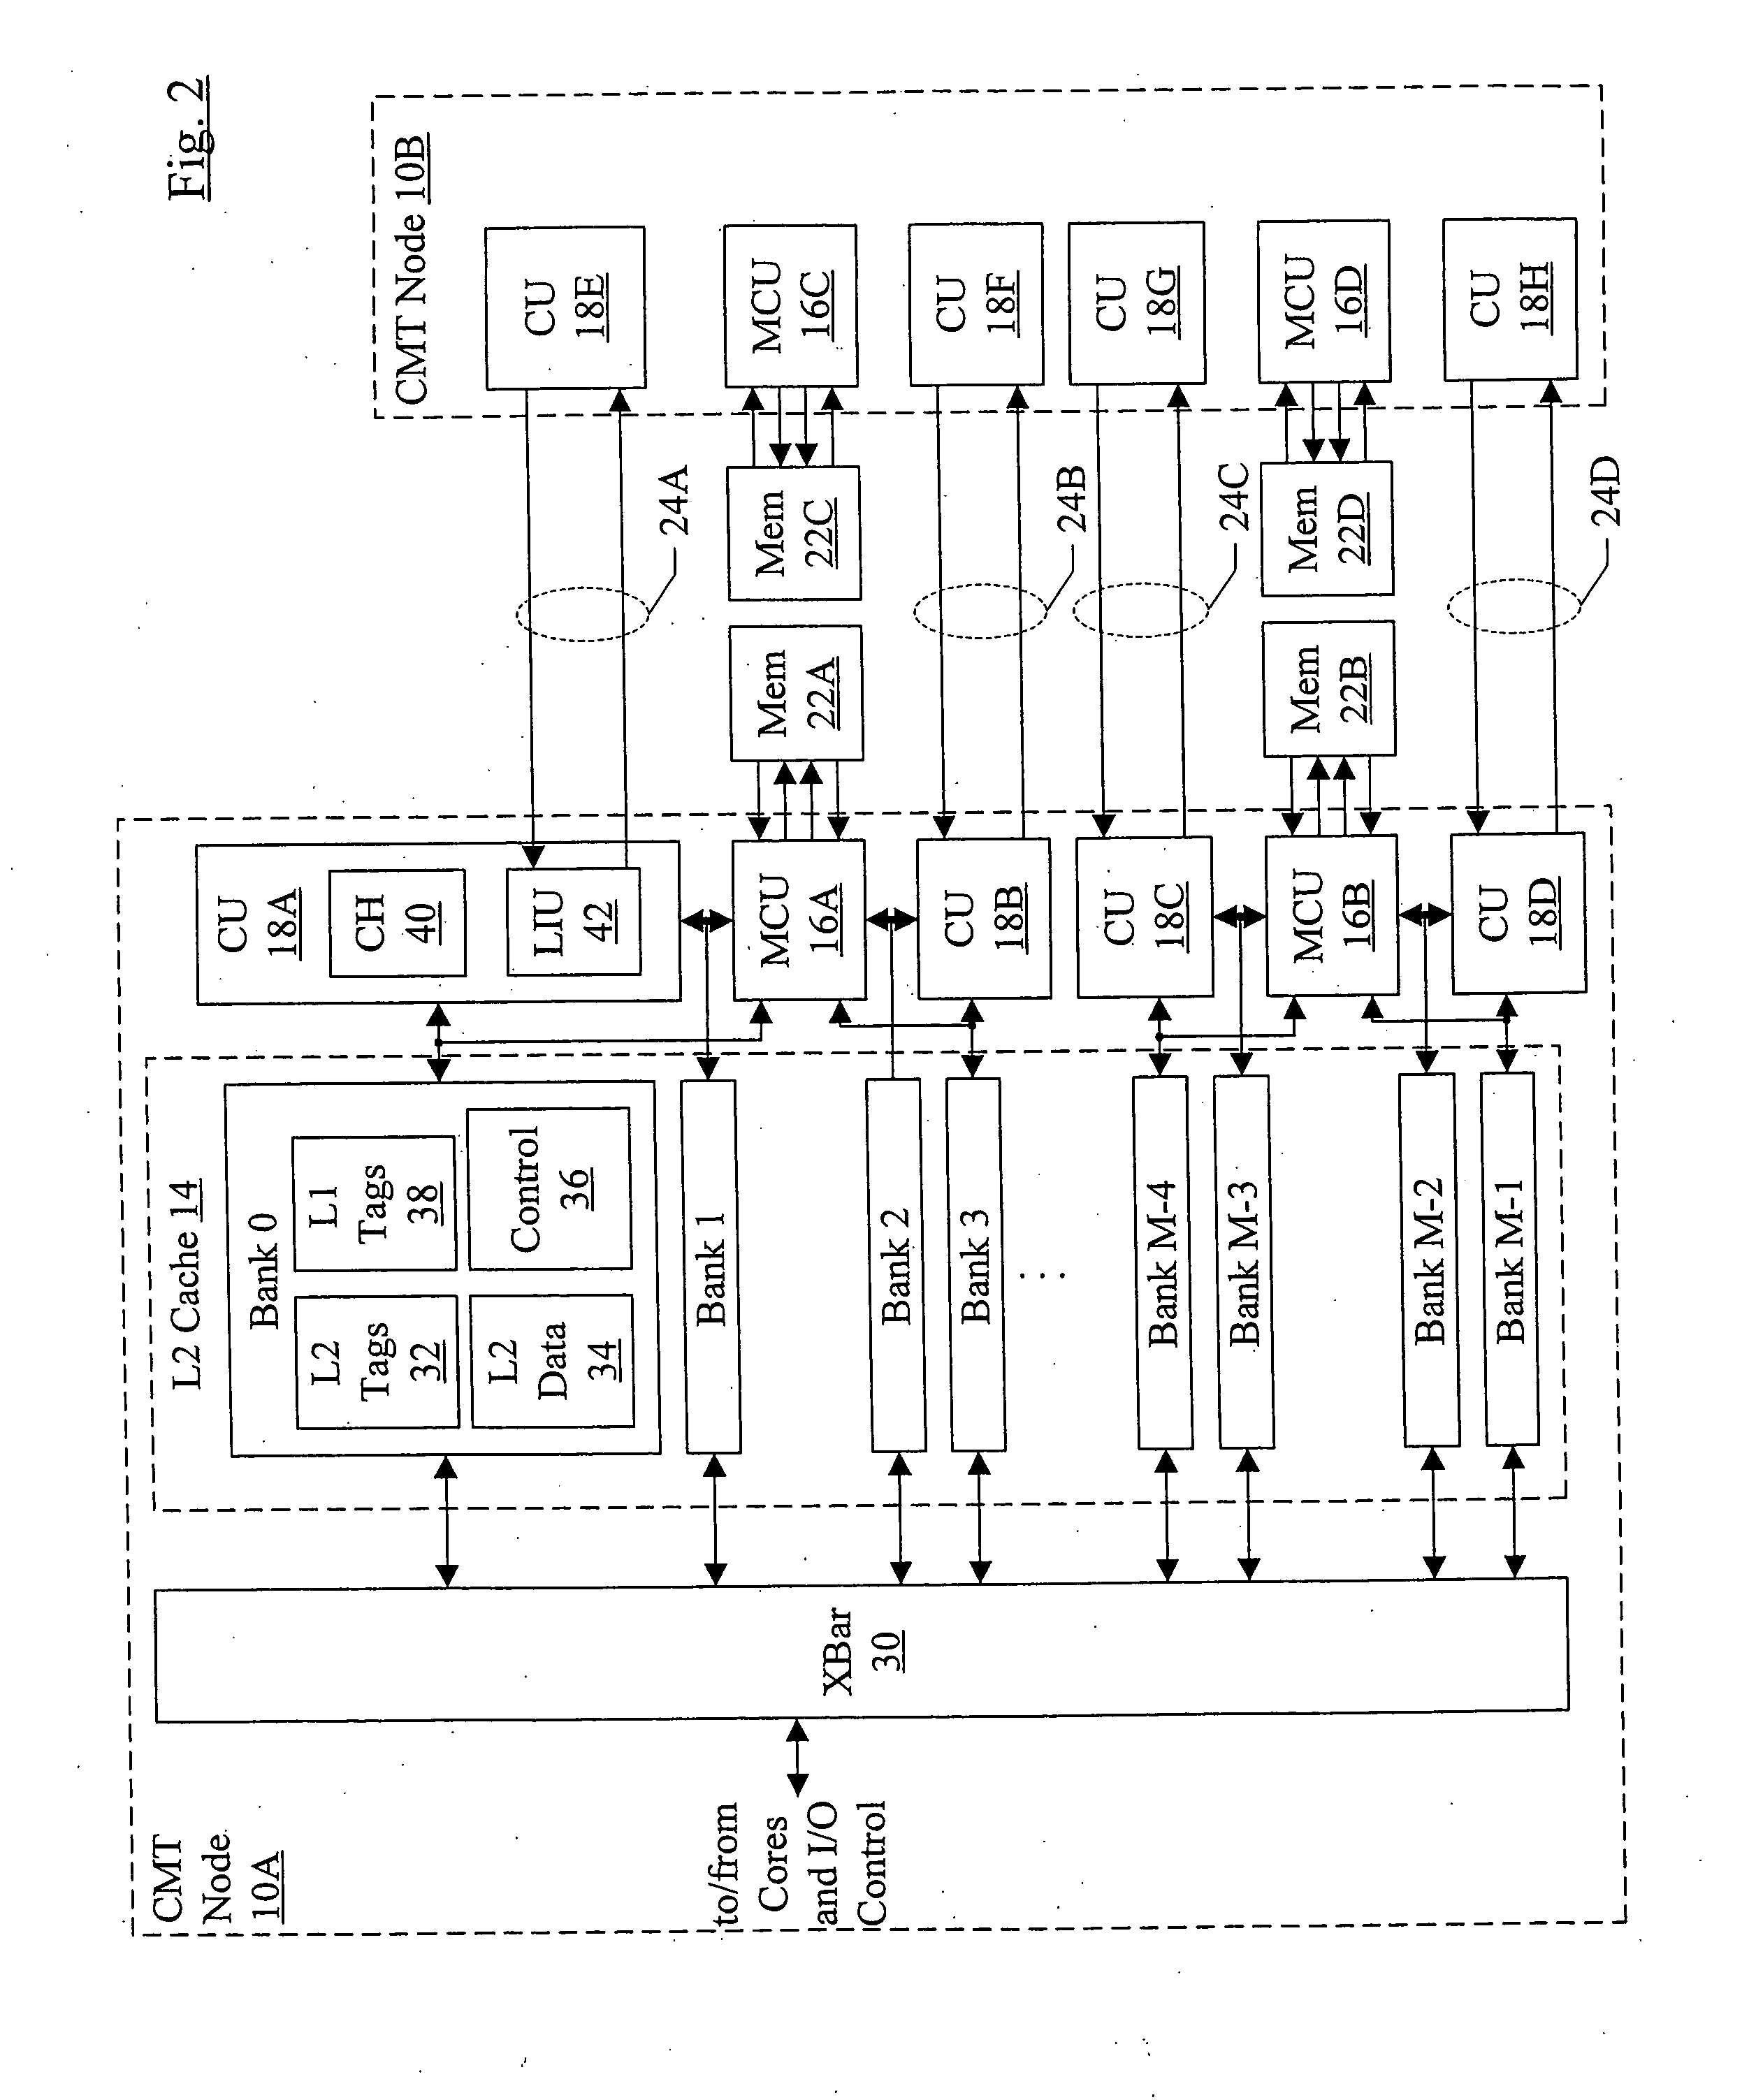 Multi-socked symmetric multiprocessing (SMP) system for chip multi-threaded (CMT) processors